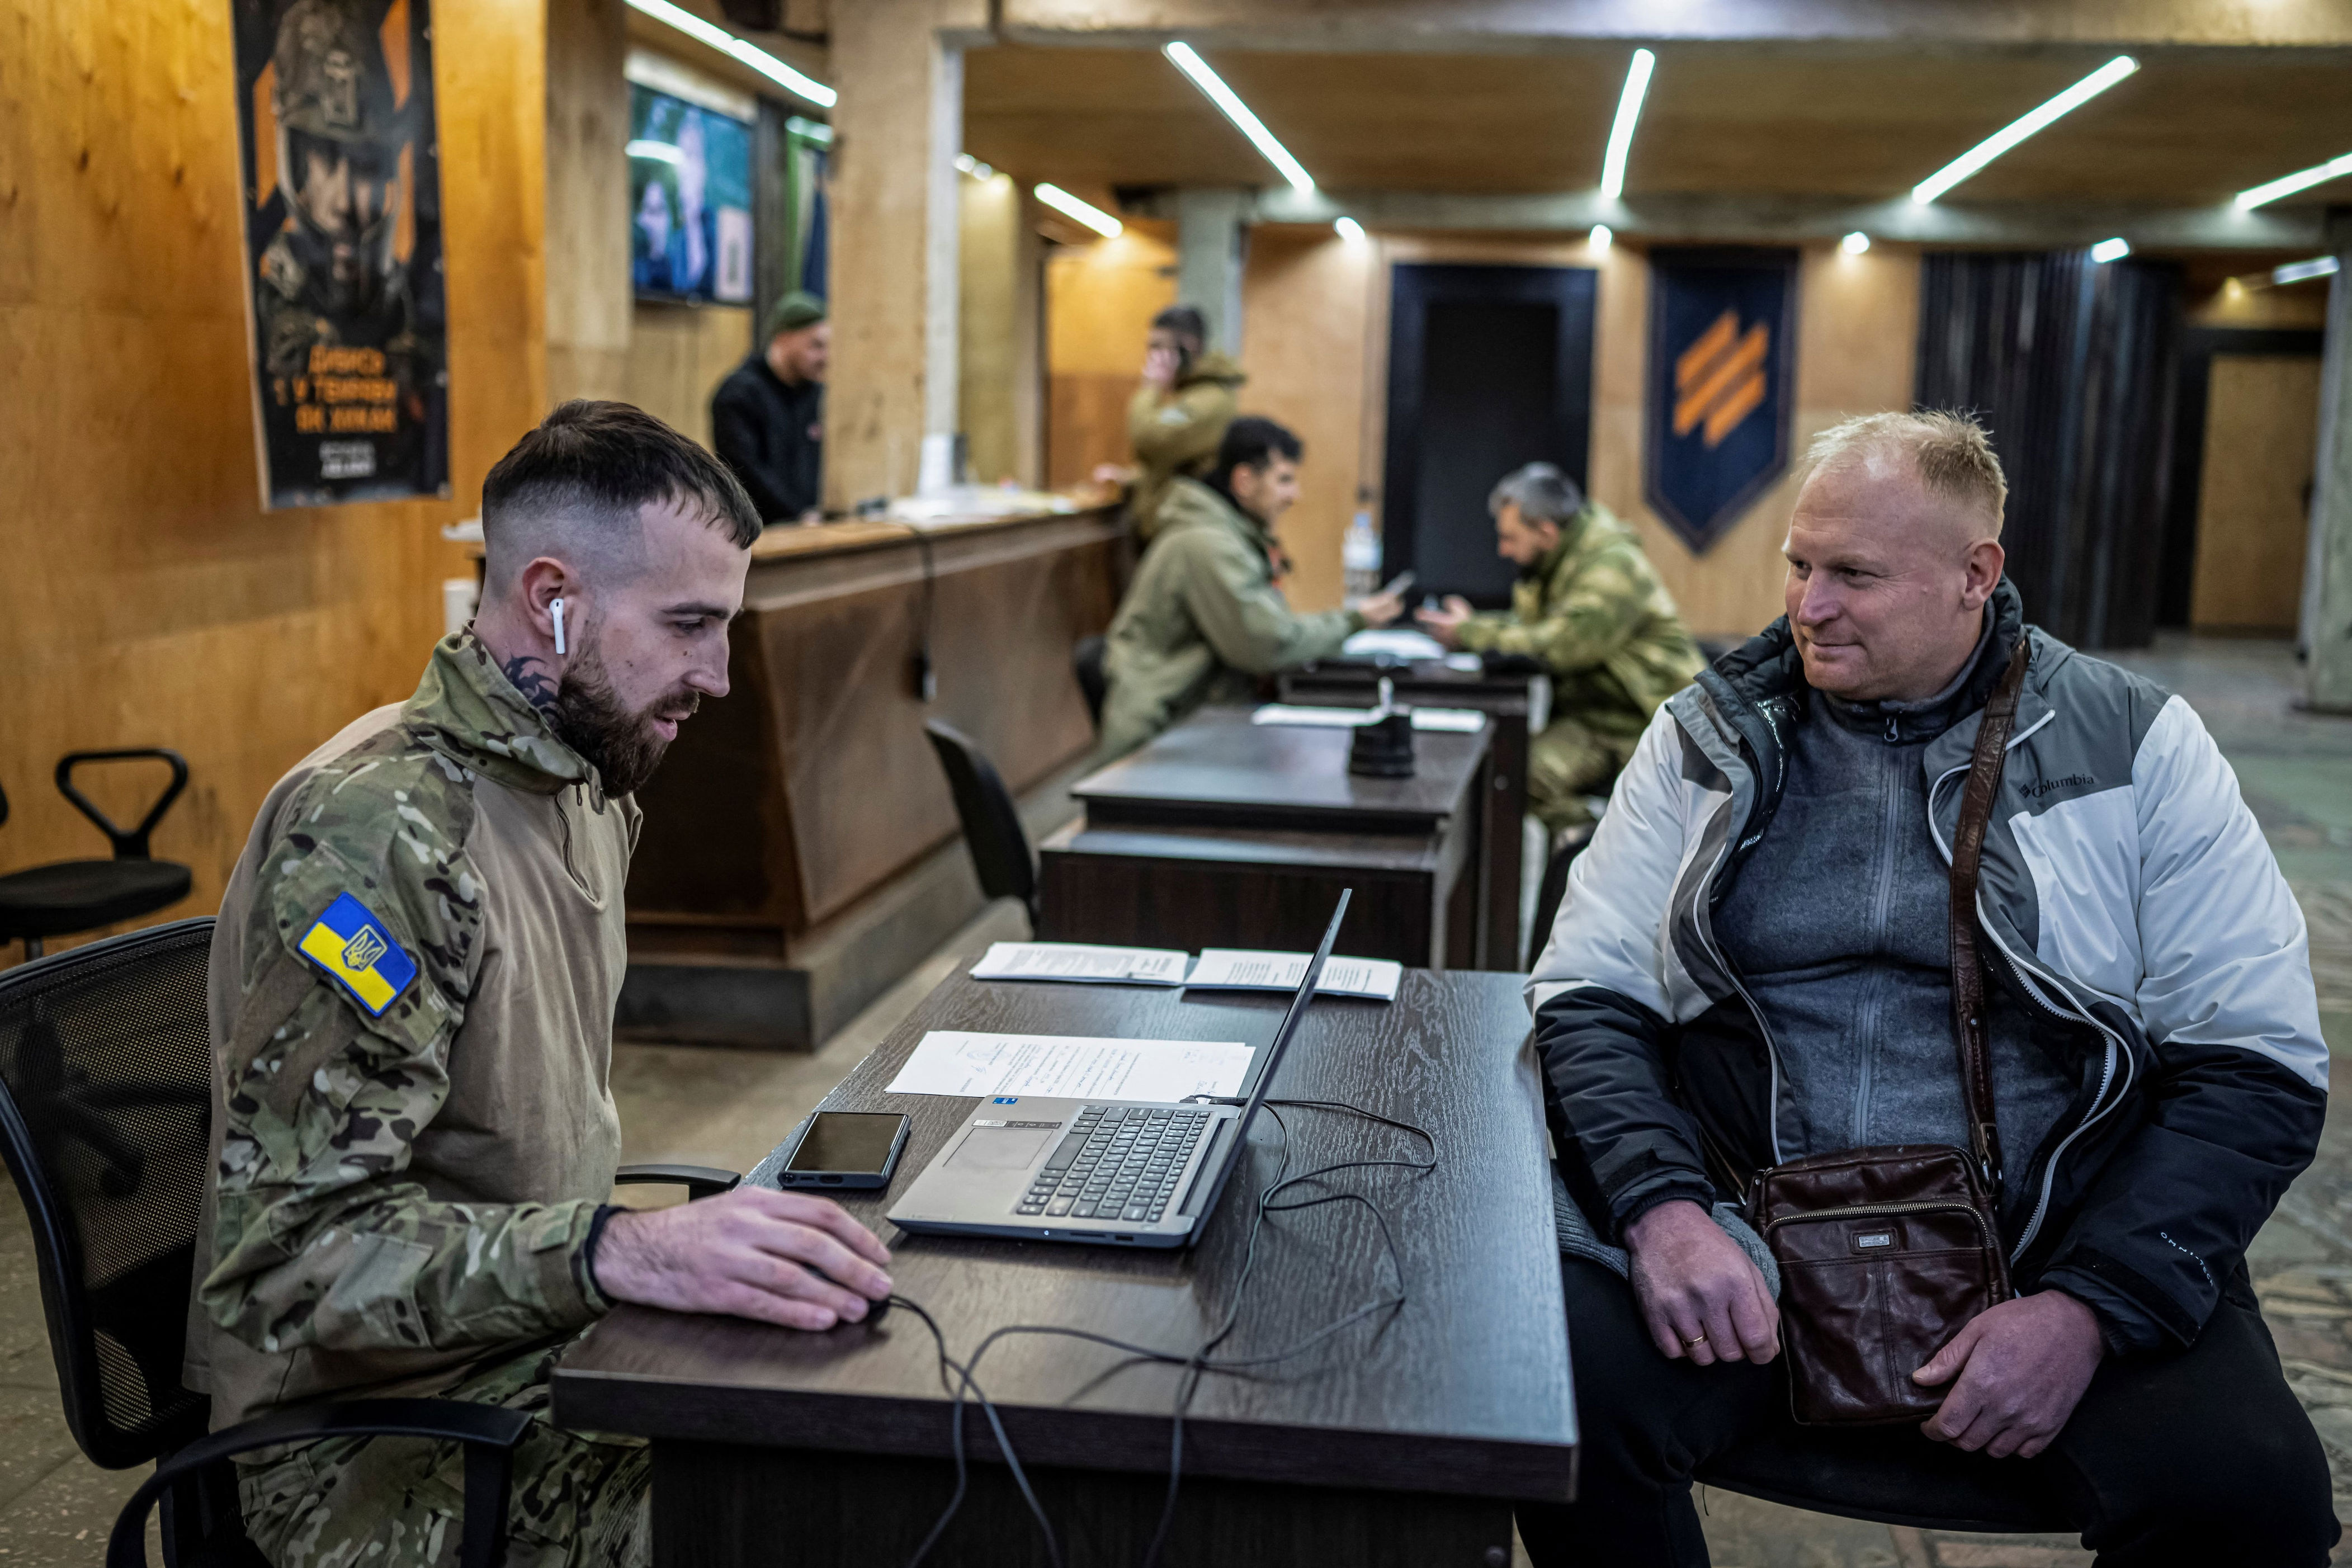 soldiers wanted in ukraine: send your resume and we’ll call you